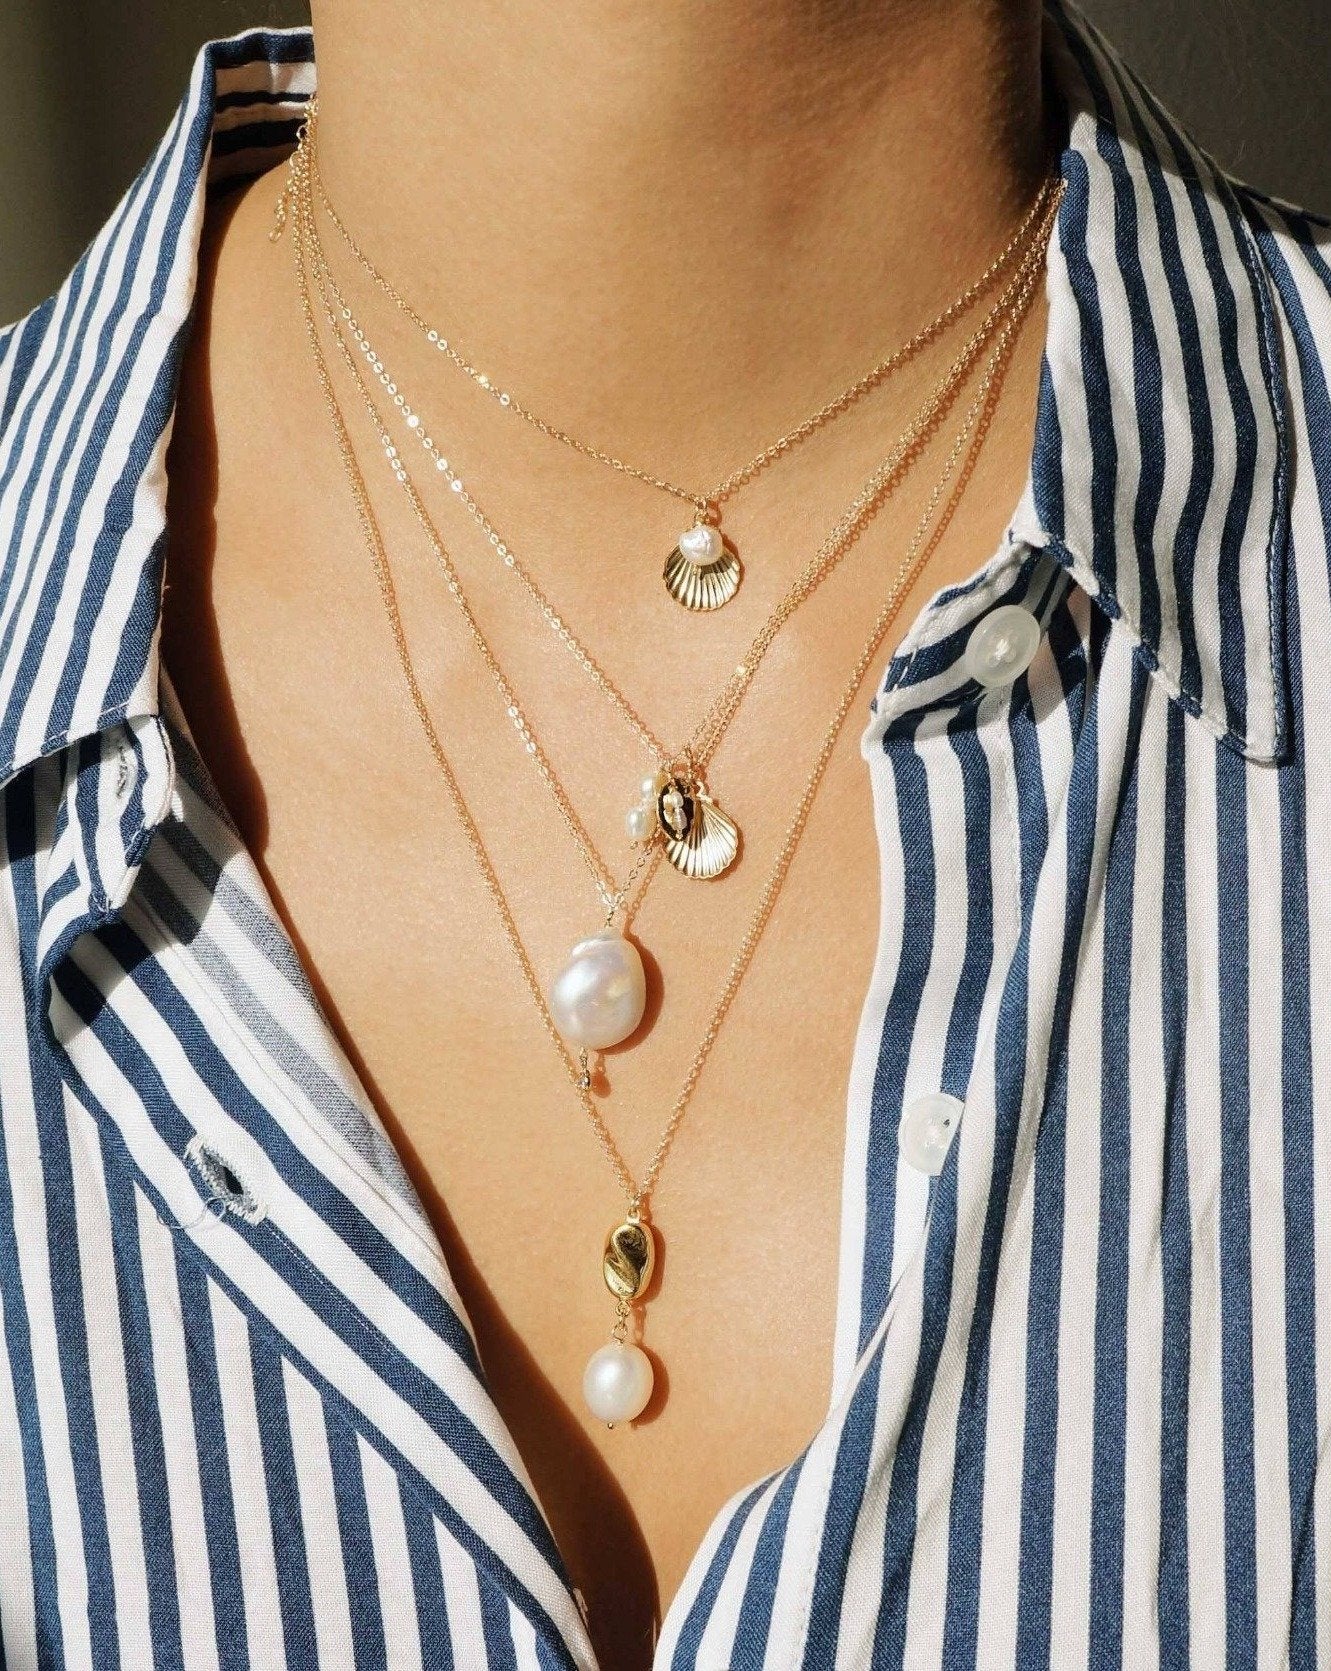 Belle Necklace by KOZAKH. A 16 to 18 inch adjustable length necklace in 14K Gold Filled, featuring a 5mm flat irregular Pearl and a Shell charm.